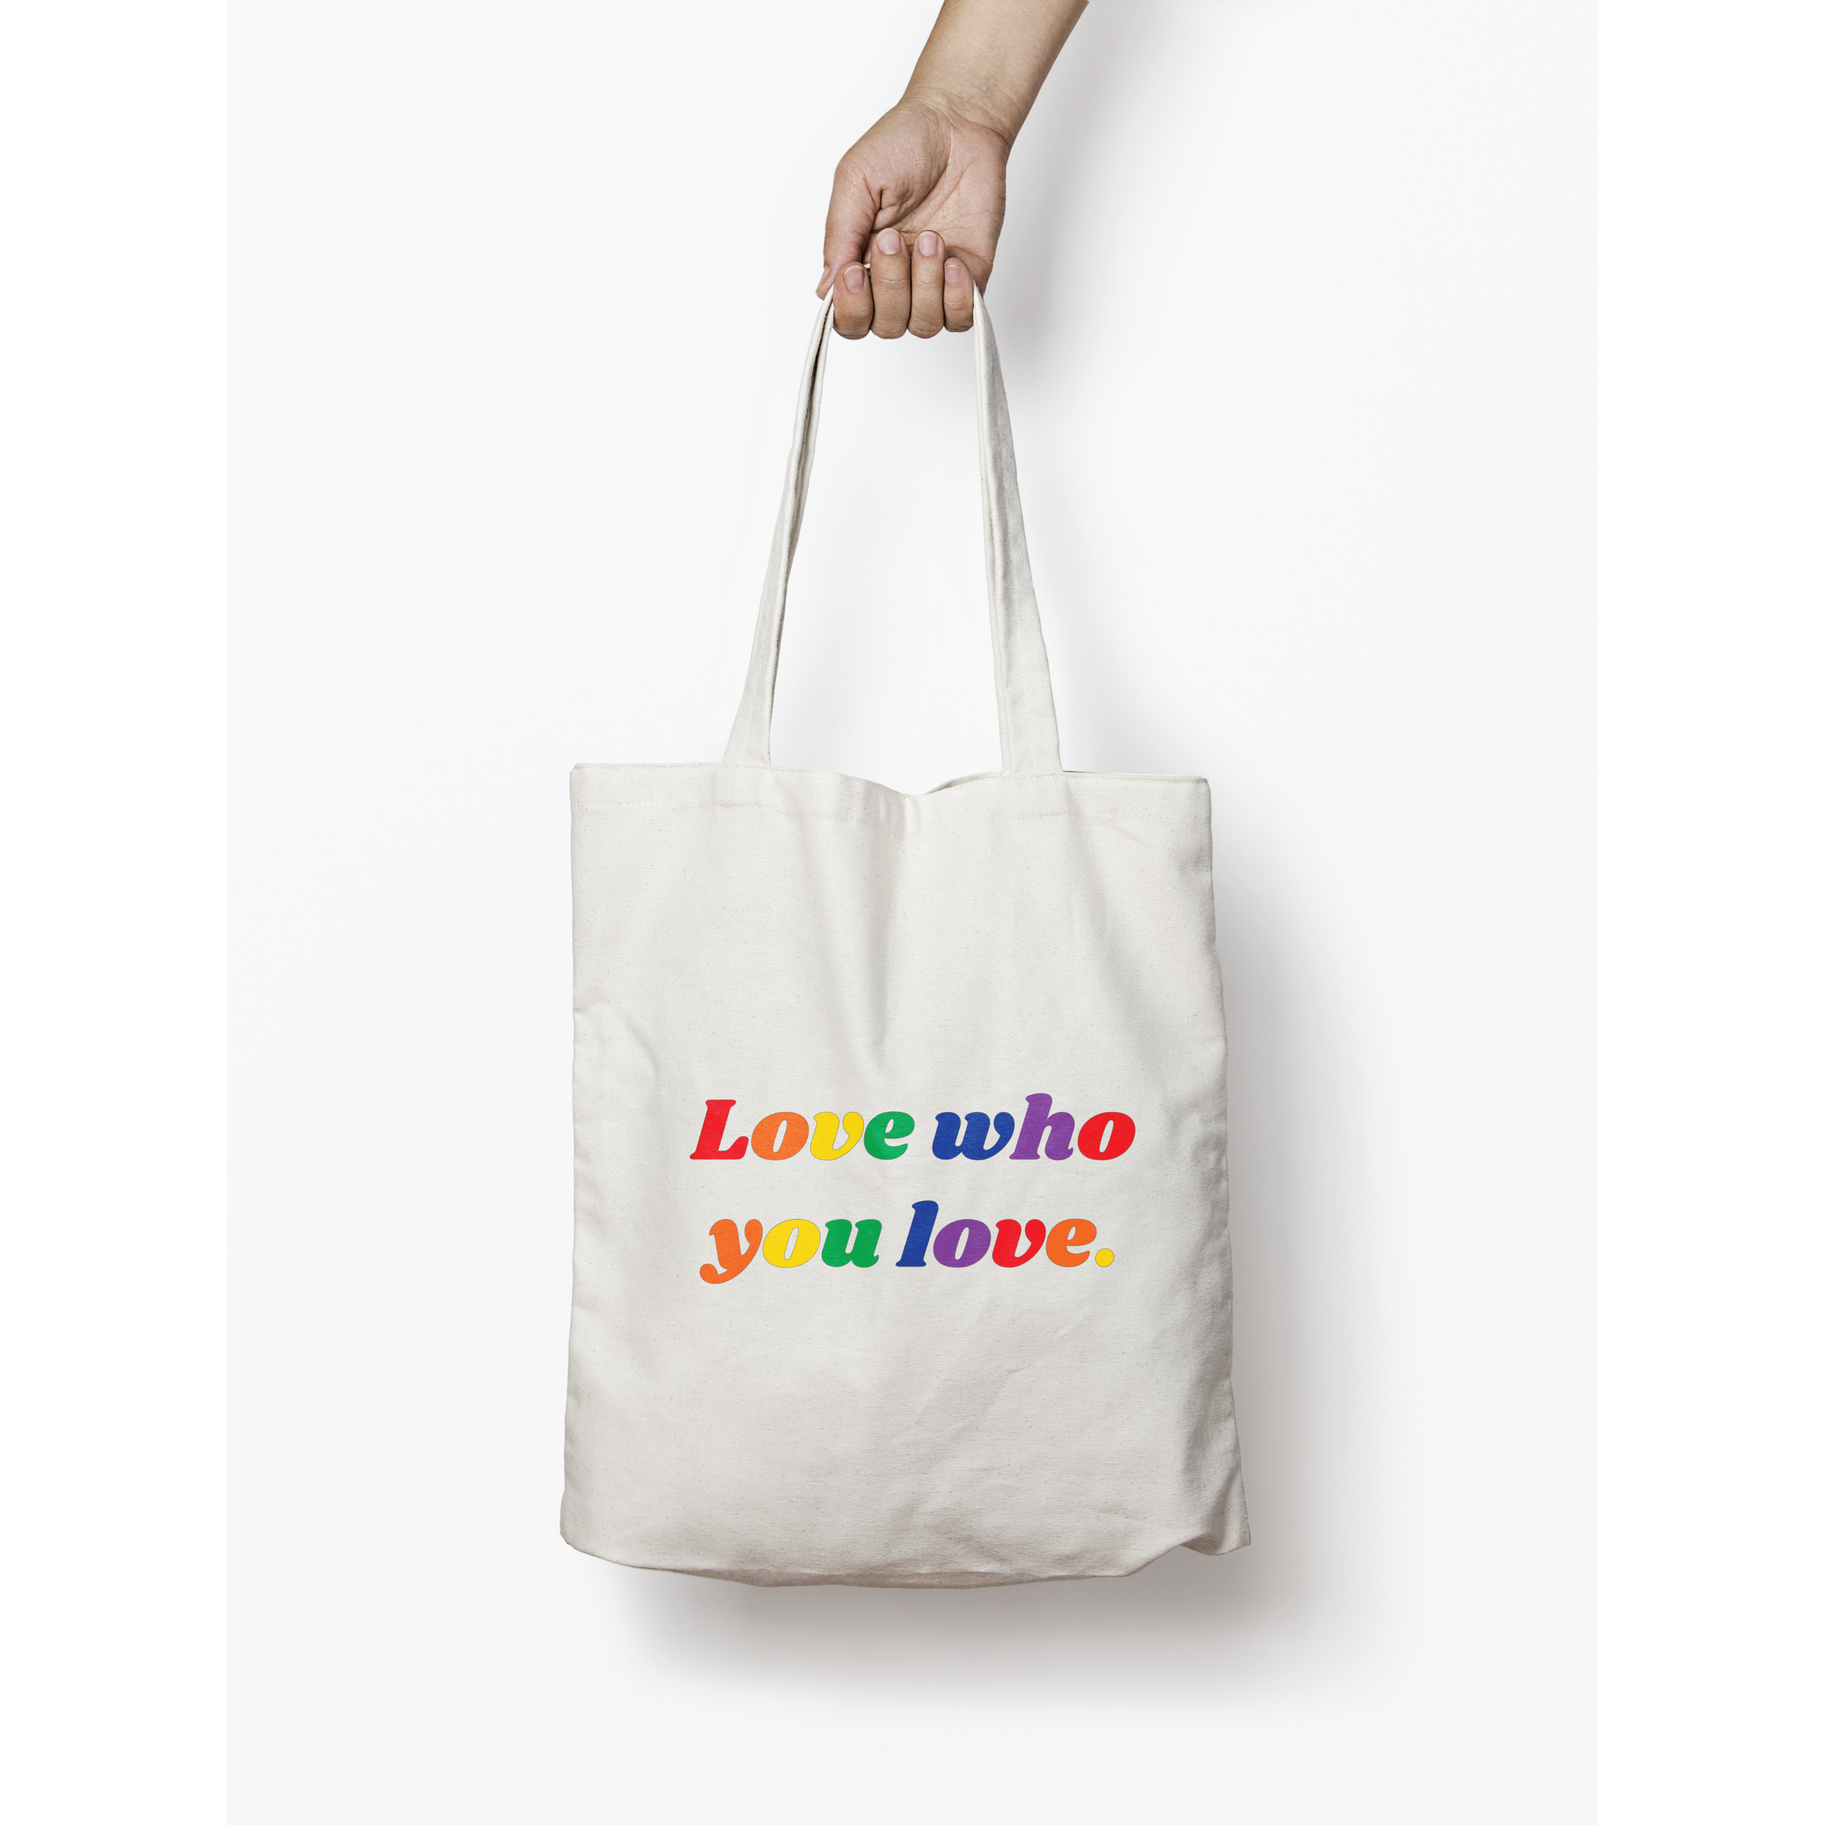 On Your Sleeve Love Who You Love Tote Bag